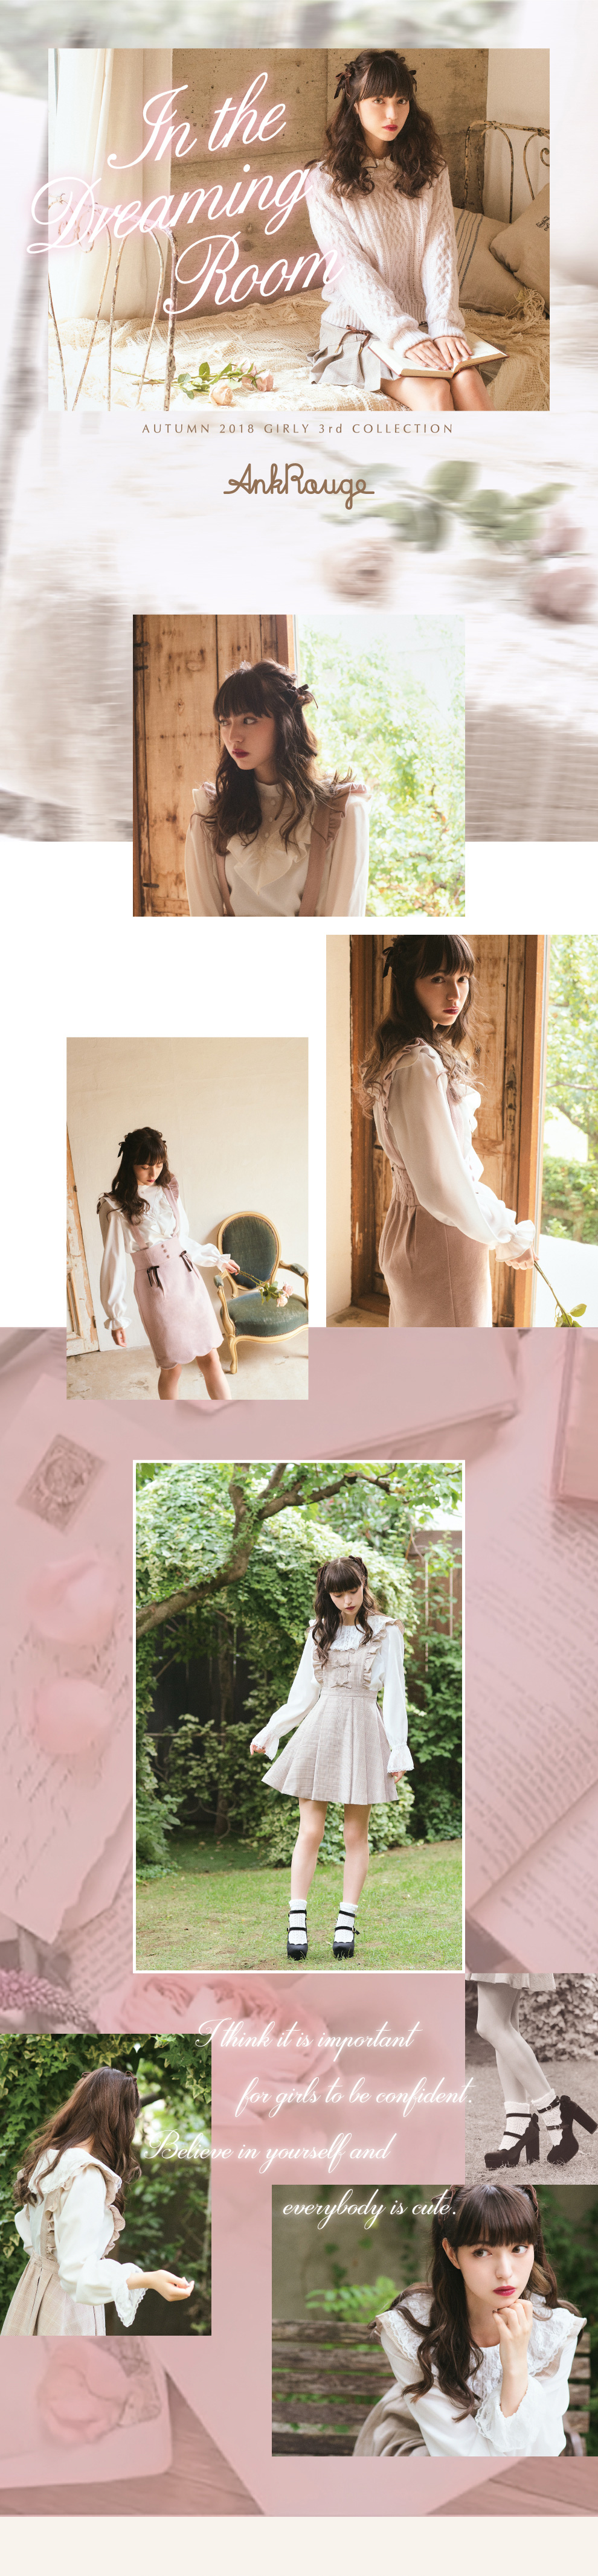 Autumn2018 GIRLY 3rd COLLECTION